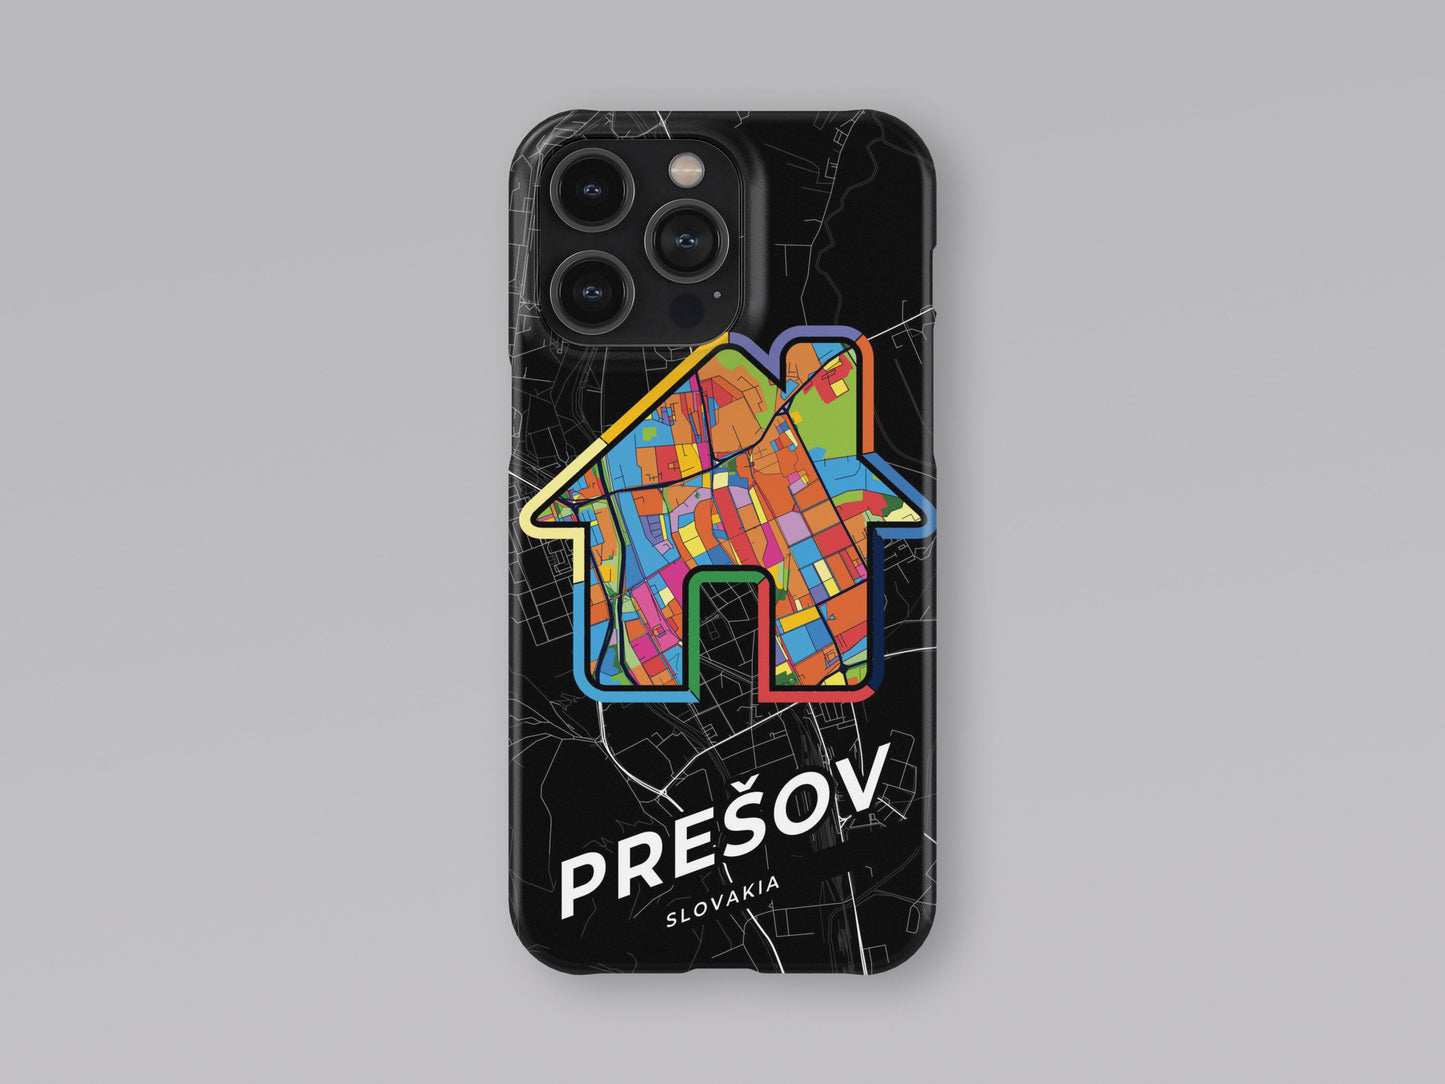 Prešov Slovakia slim phone case with colorful icon. Birthday, wedding or housewarming gift. Couple match cases. 3